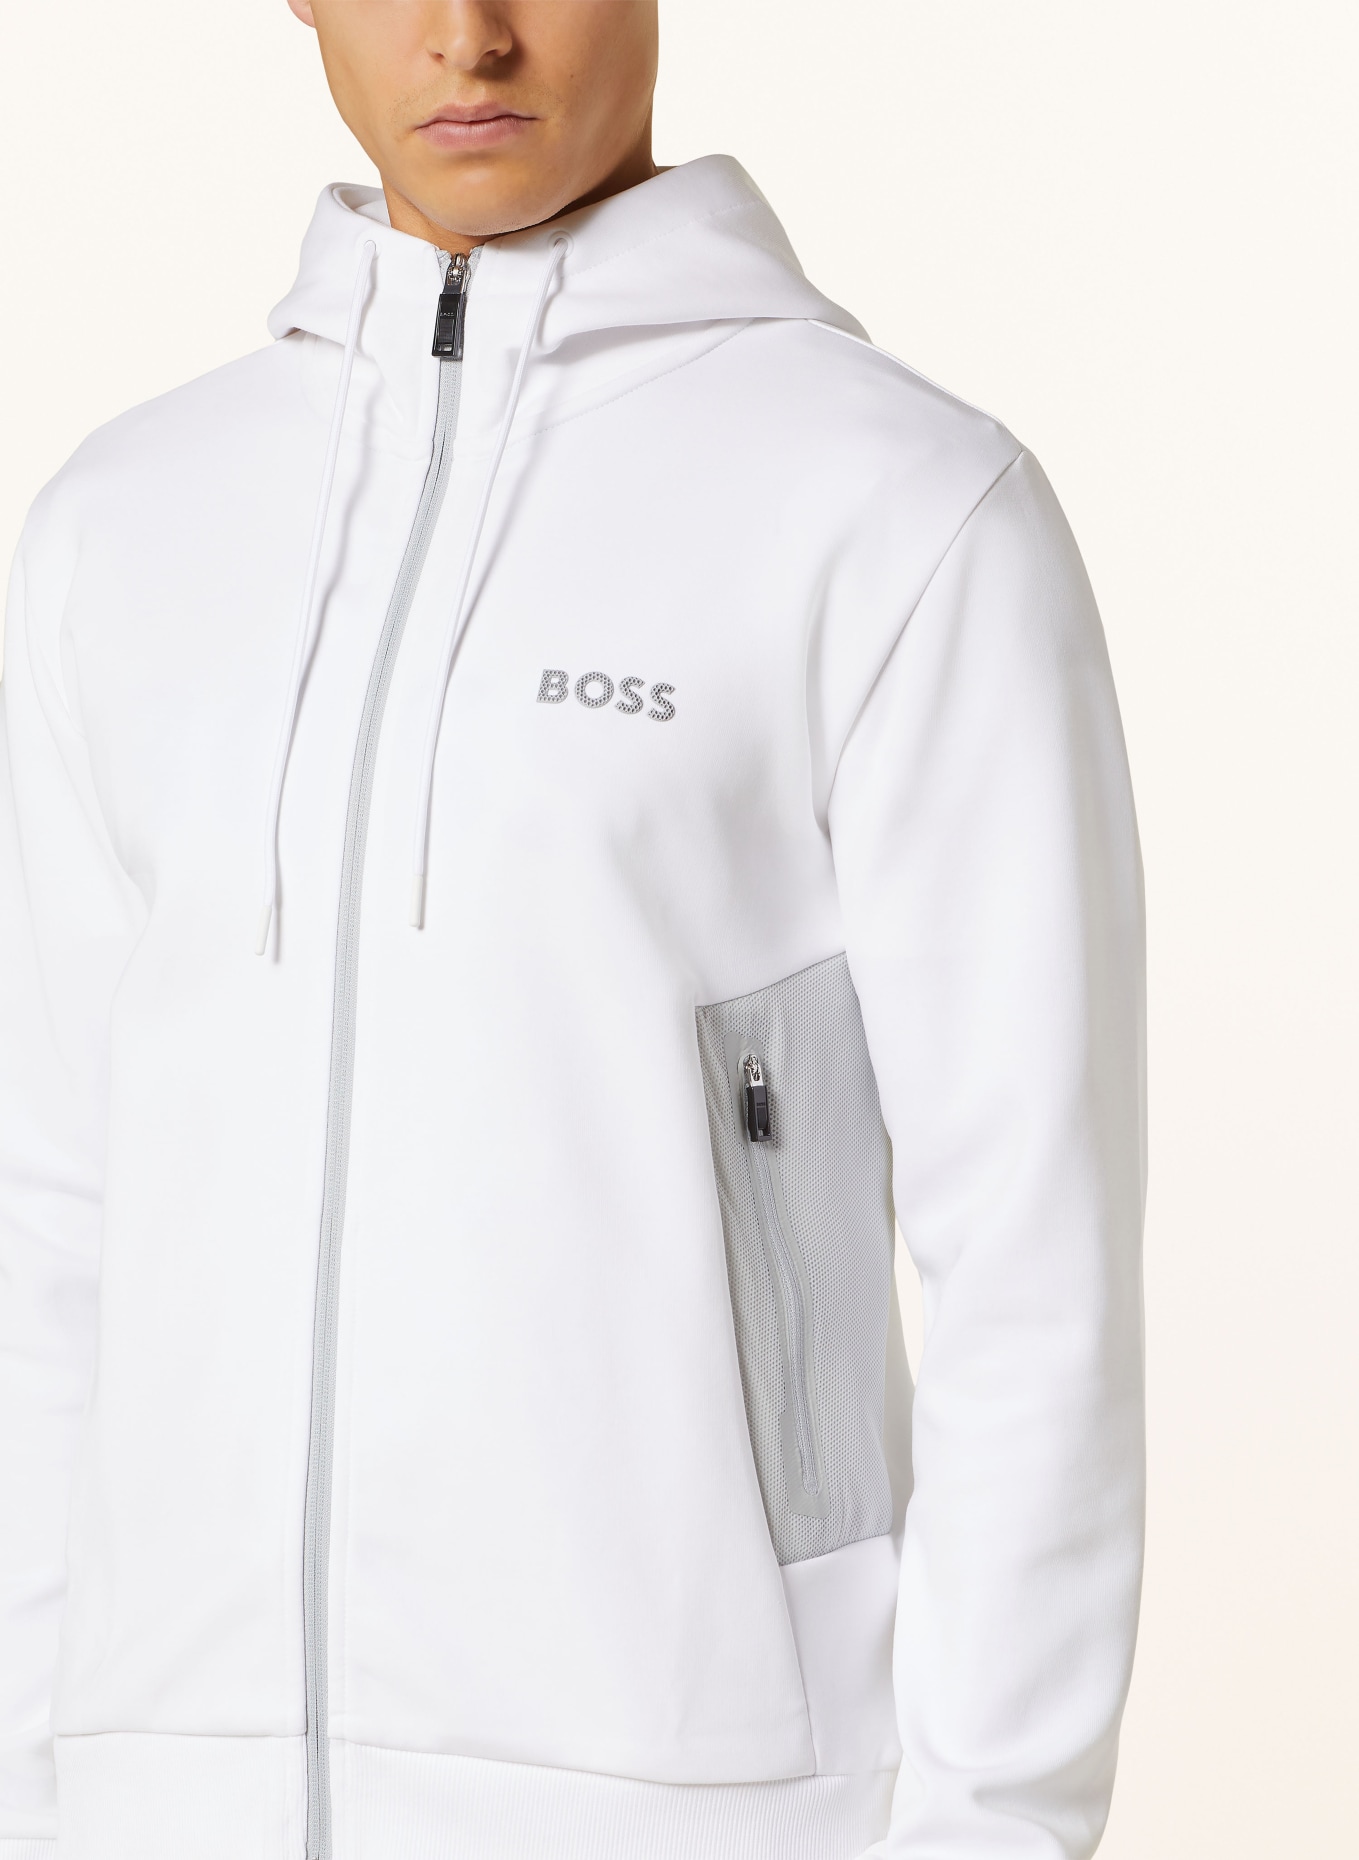 BOSS Sweat jacket SAGGY, Color: WHITE/ LIGHT GRAY (Image 5)